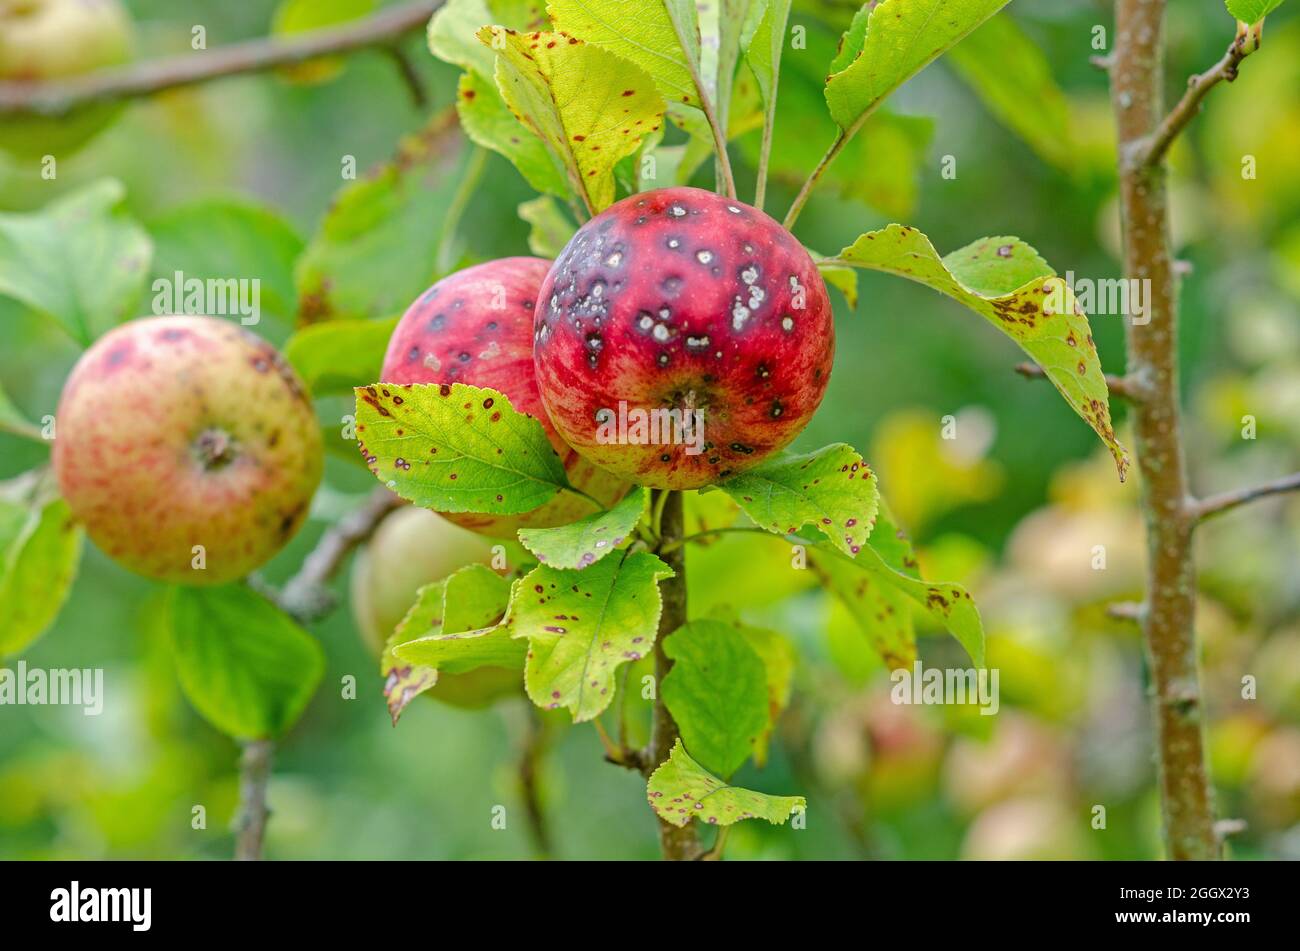 English apples with black spot rot Stock Photo